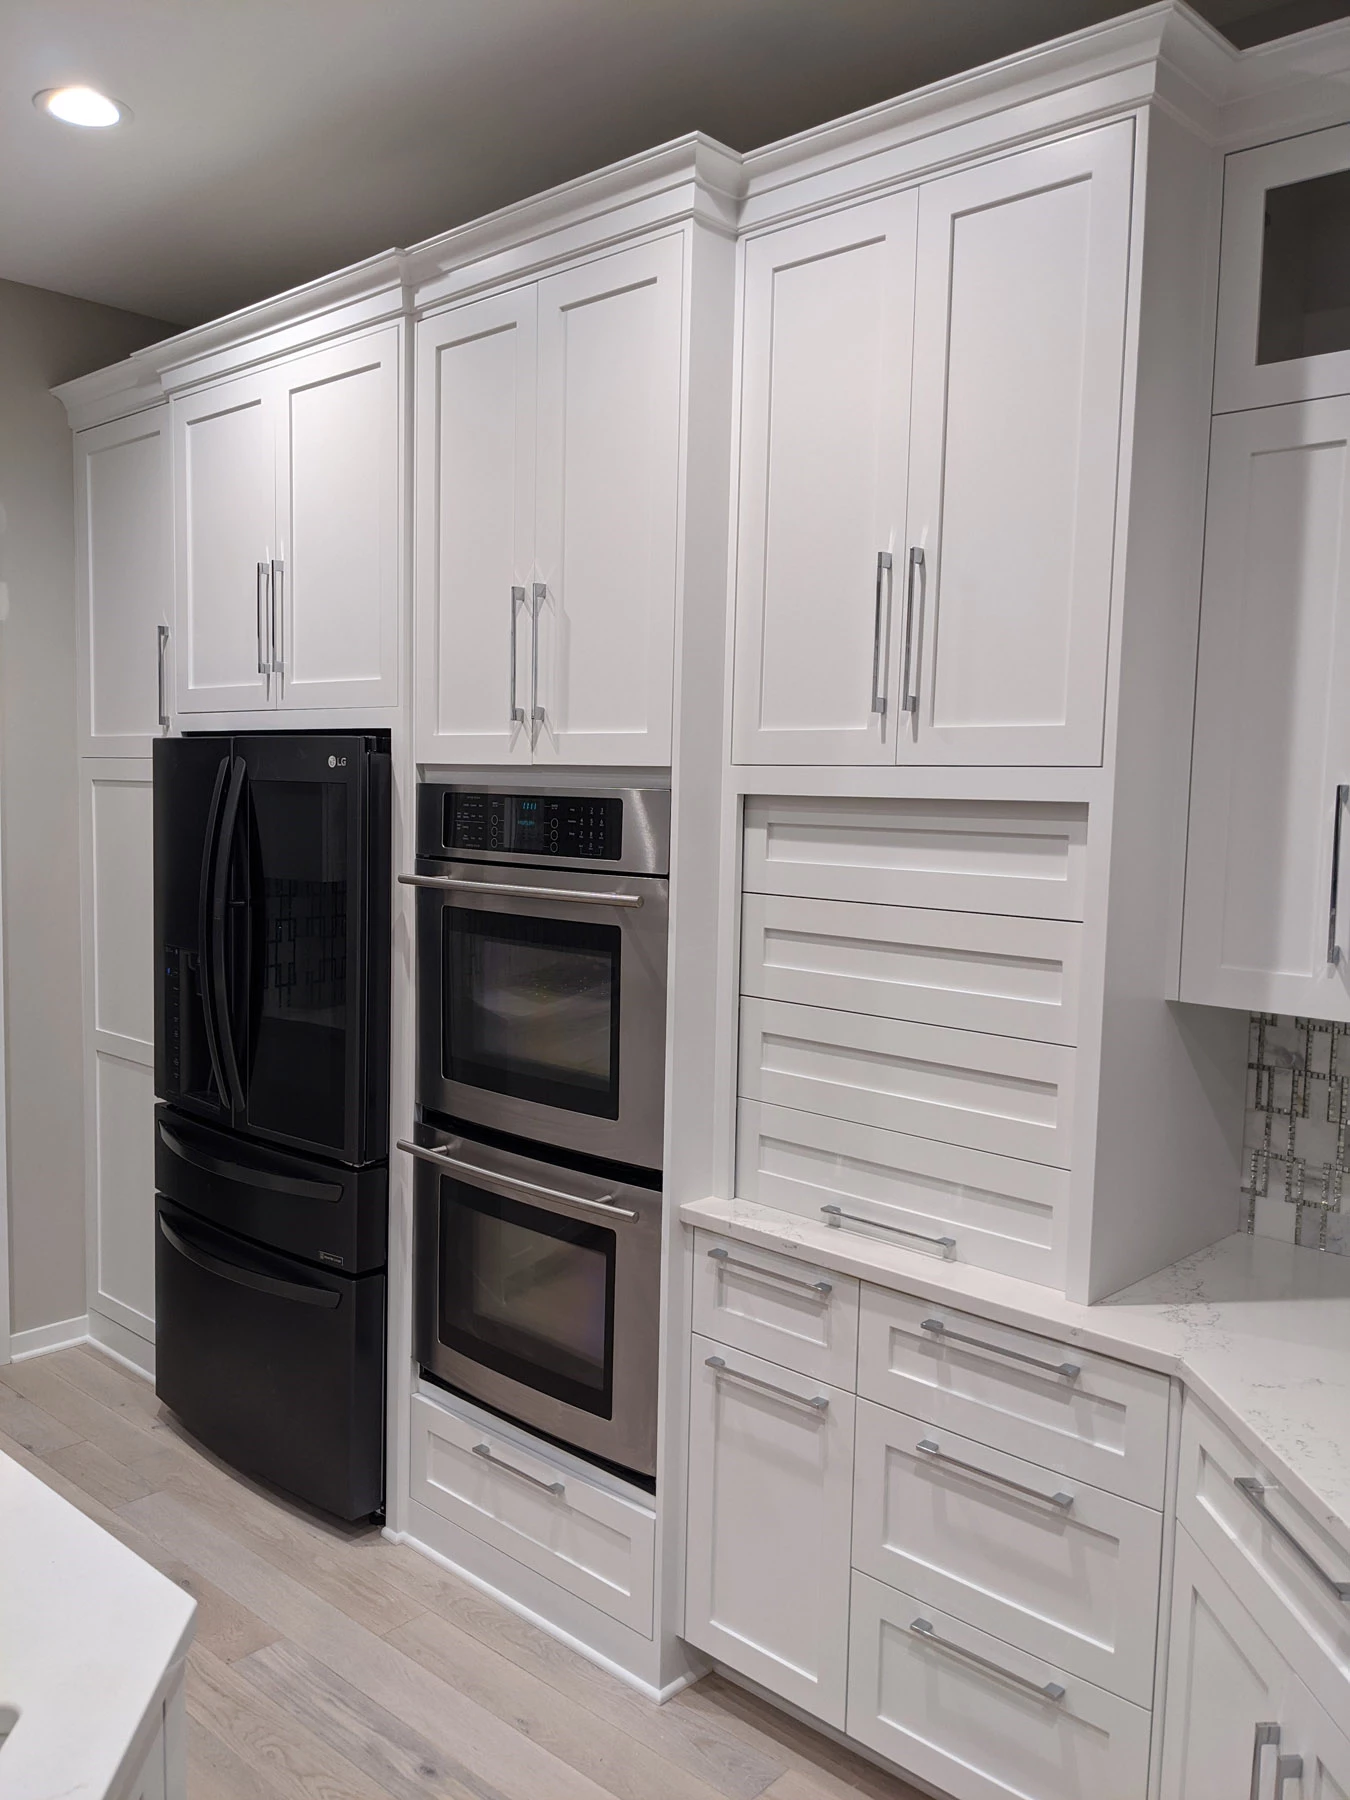 Contast Dark Appliances with White Cabinets